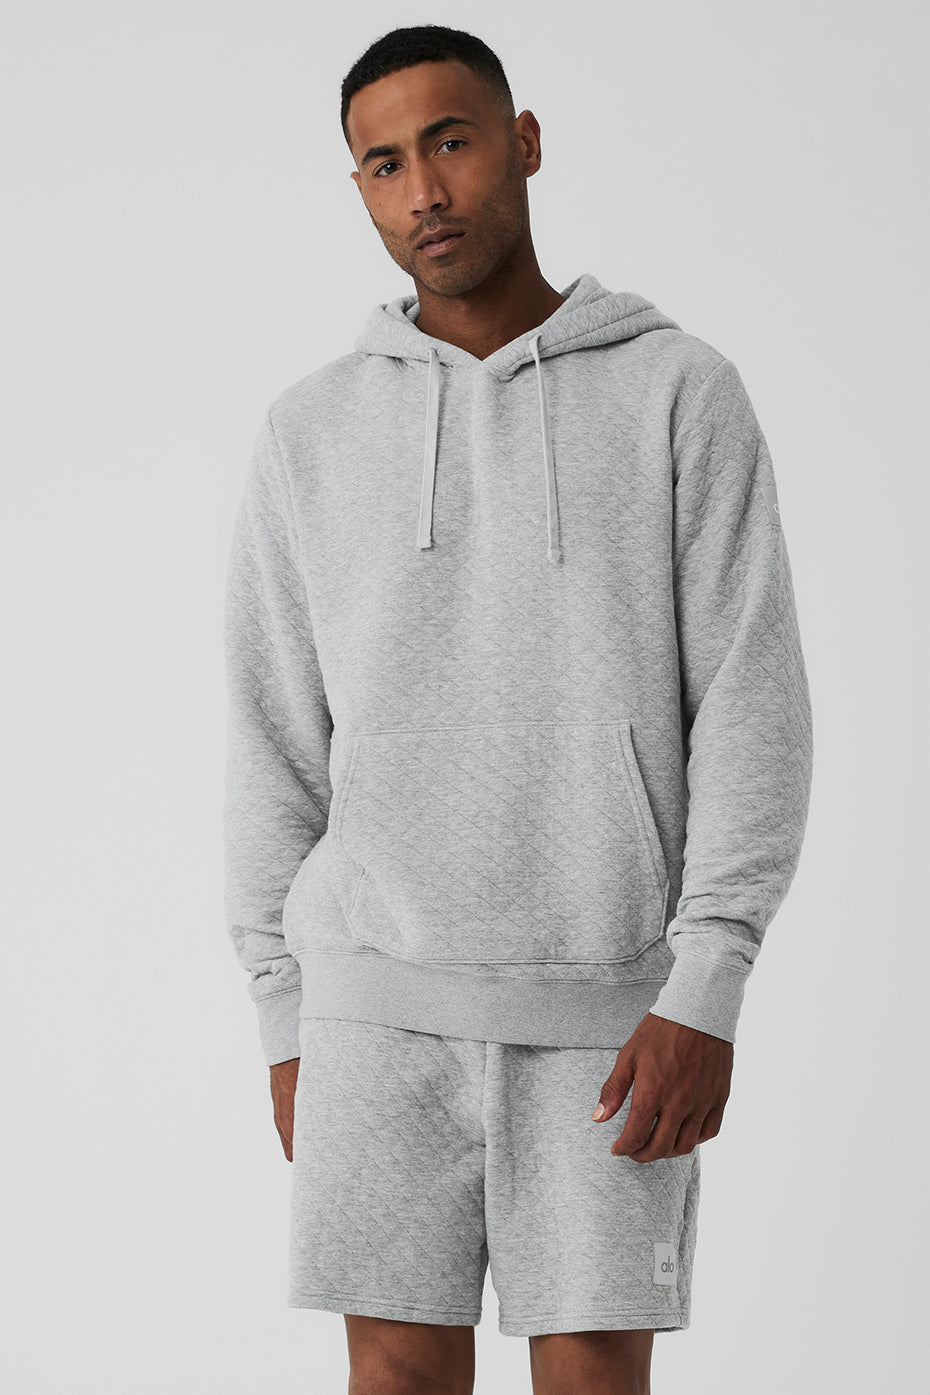 The Conquer Hoodie - Athletic Heather Grey